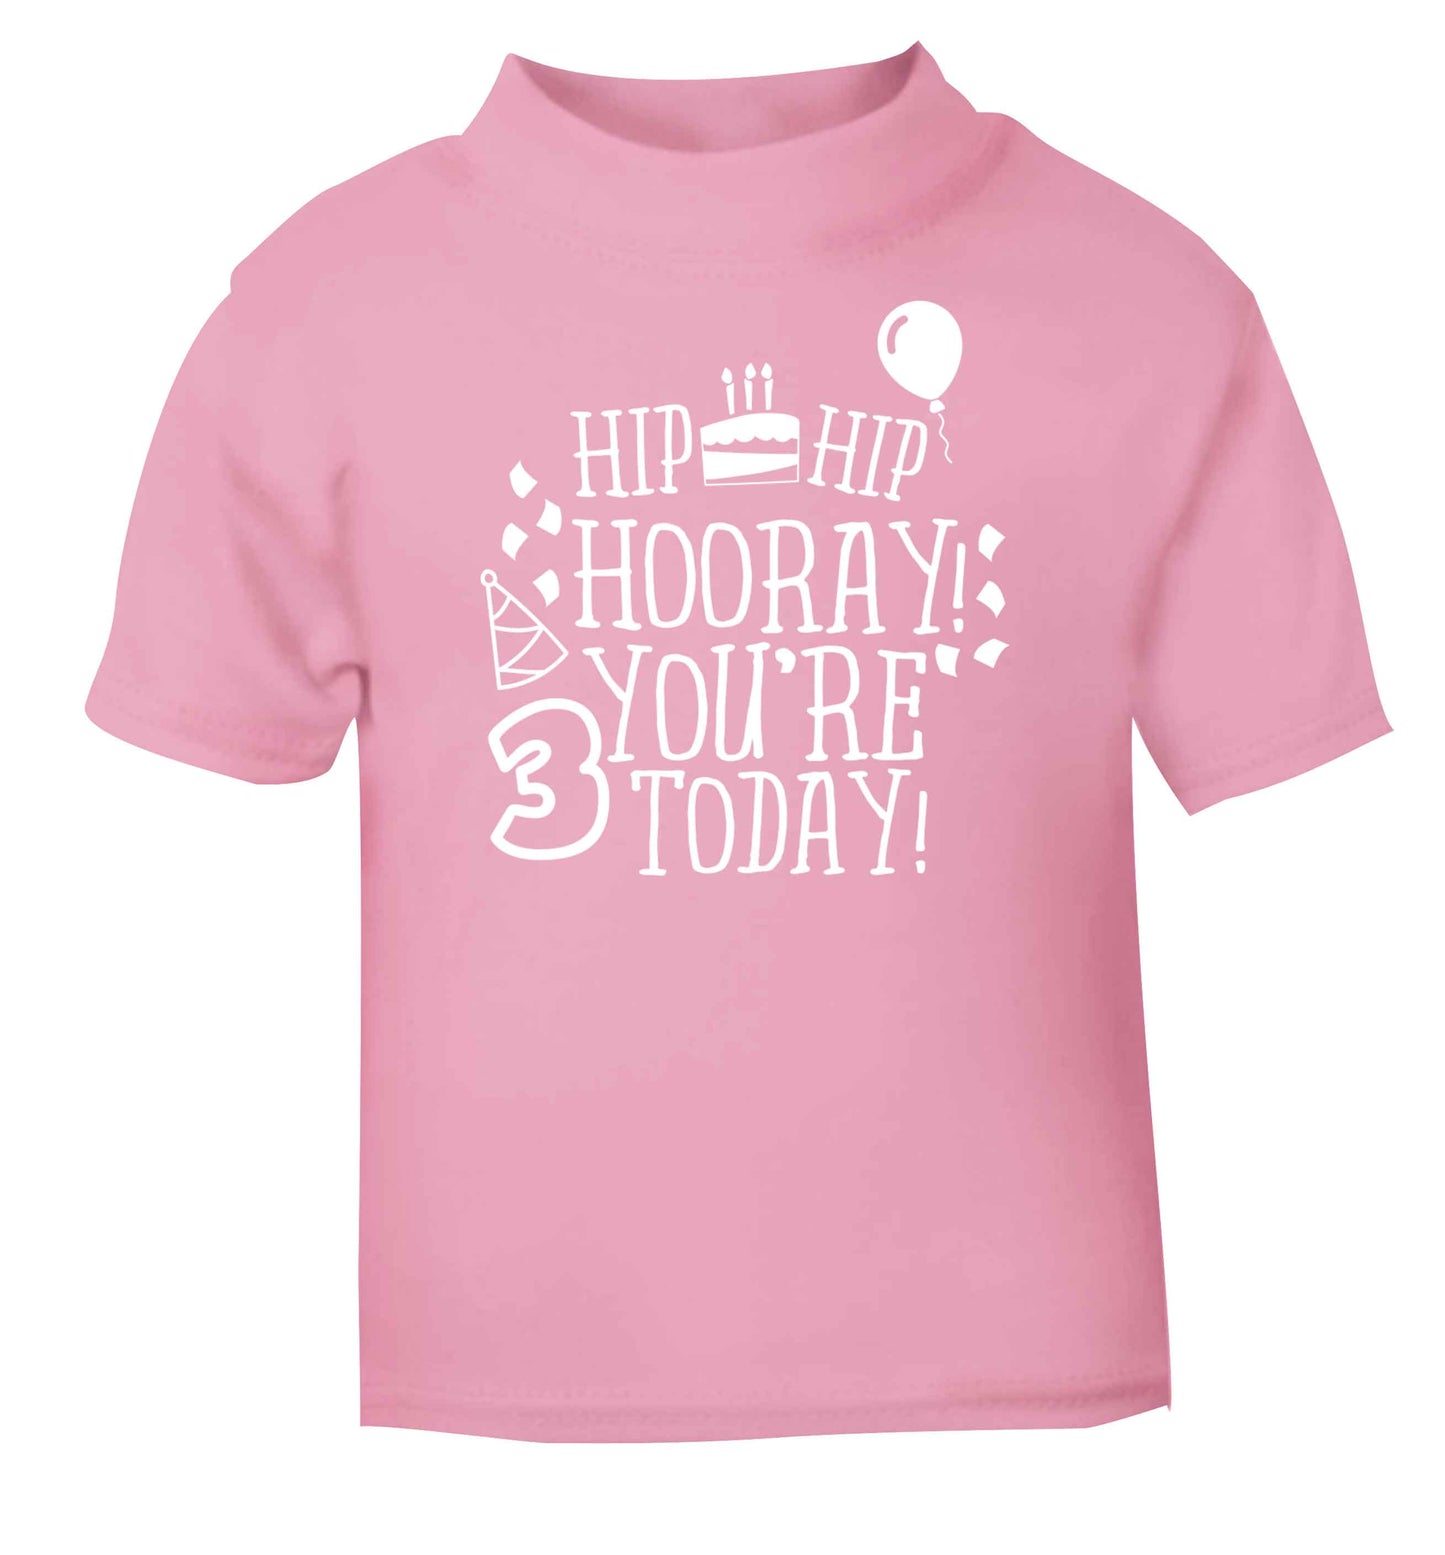 You're 3 Todaylight pink baby toddler Tshirt 2 Years